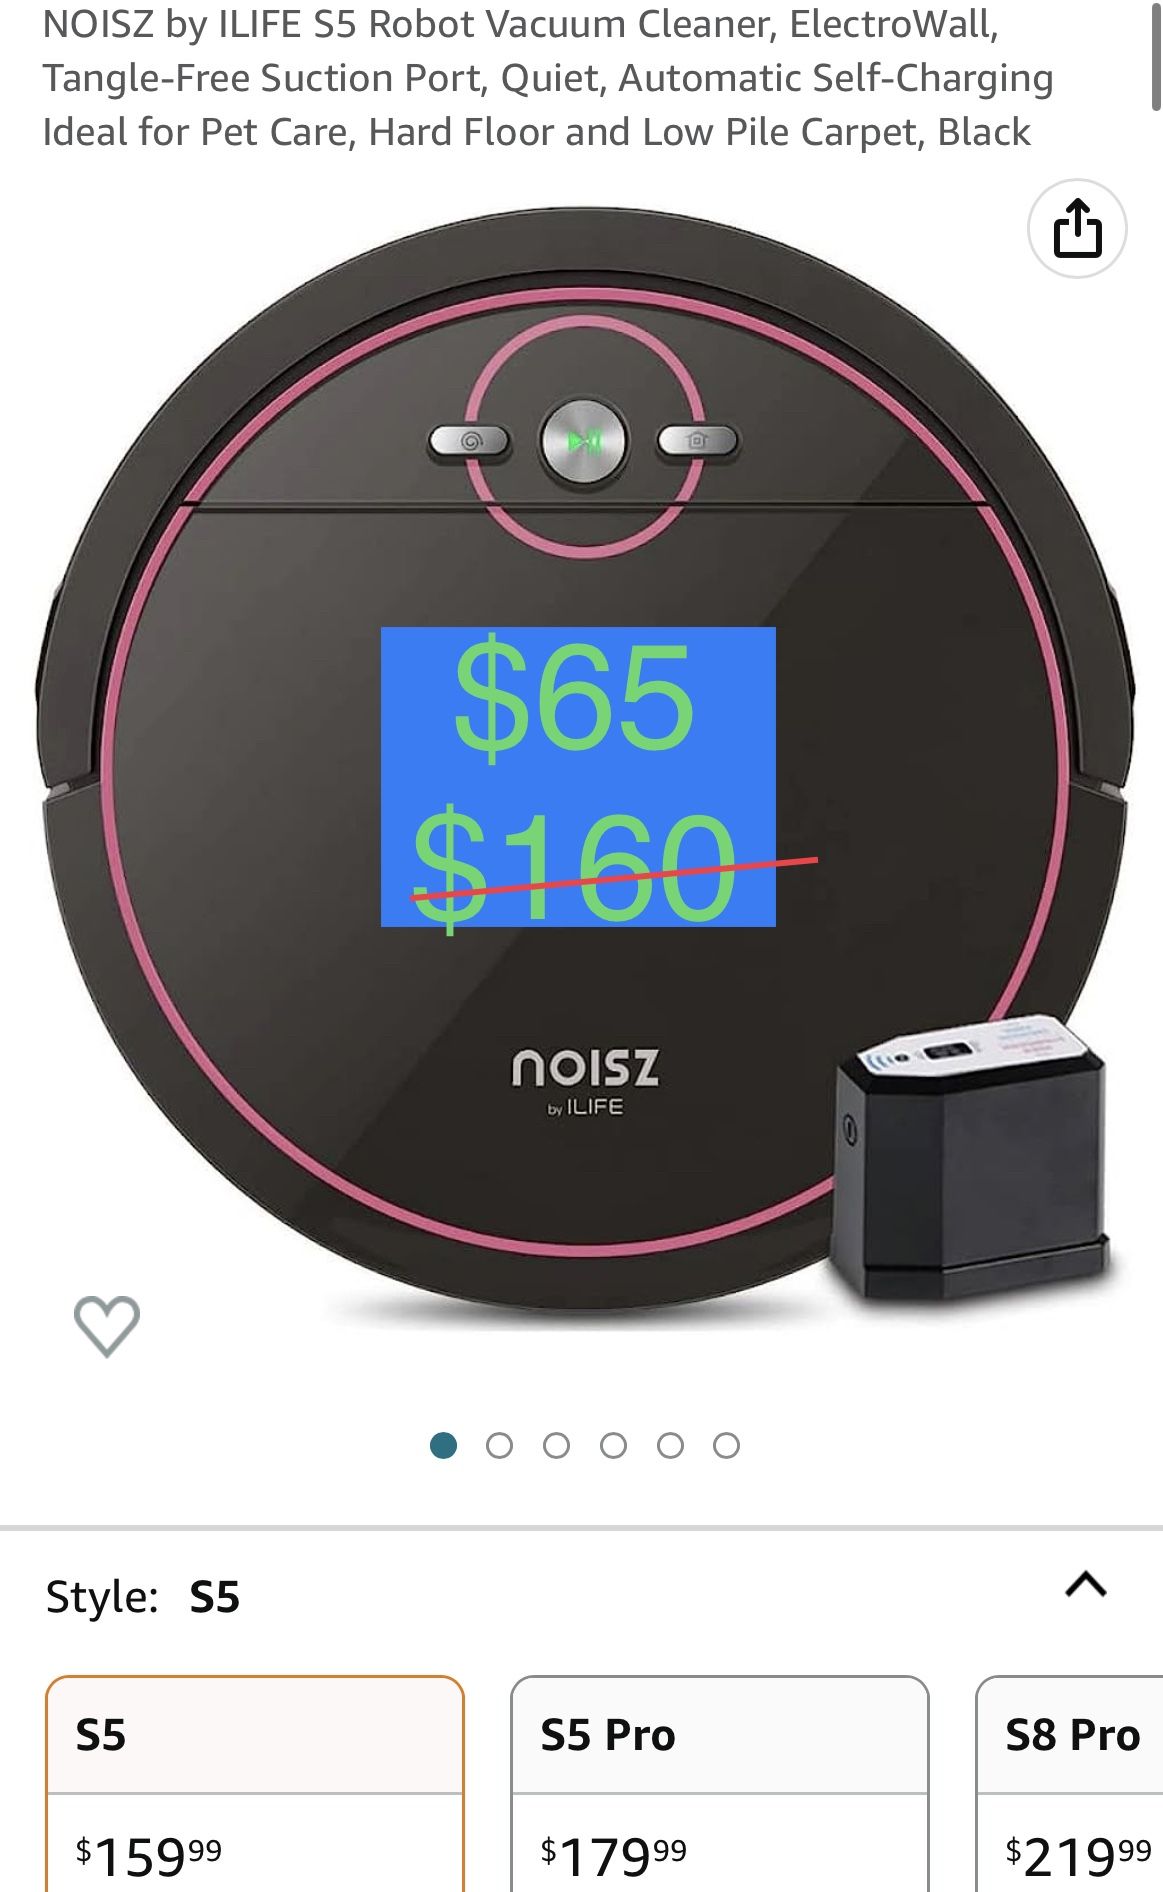 NOISZ by ILIFE S5 Robot Vacuum Cleaner, ElectroWall, Tangle-Free Suction Port, Quiet, Automatic Self-Charging Ideal for Pet Care, Hard Floor and Low P